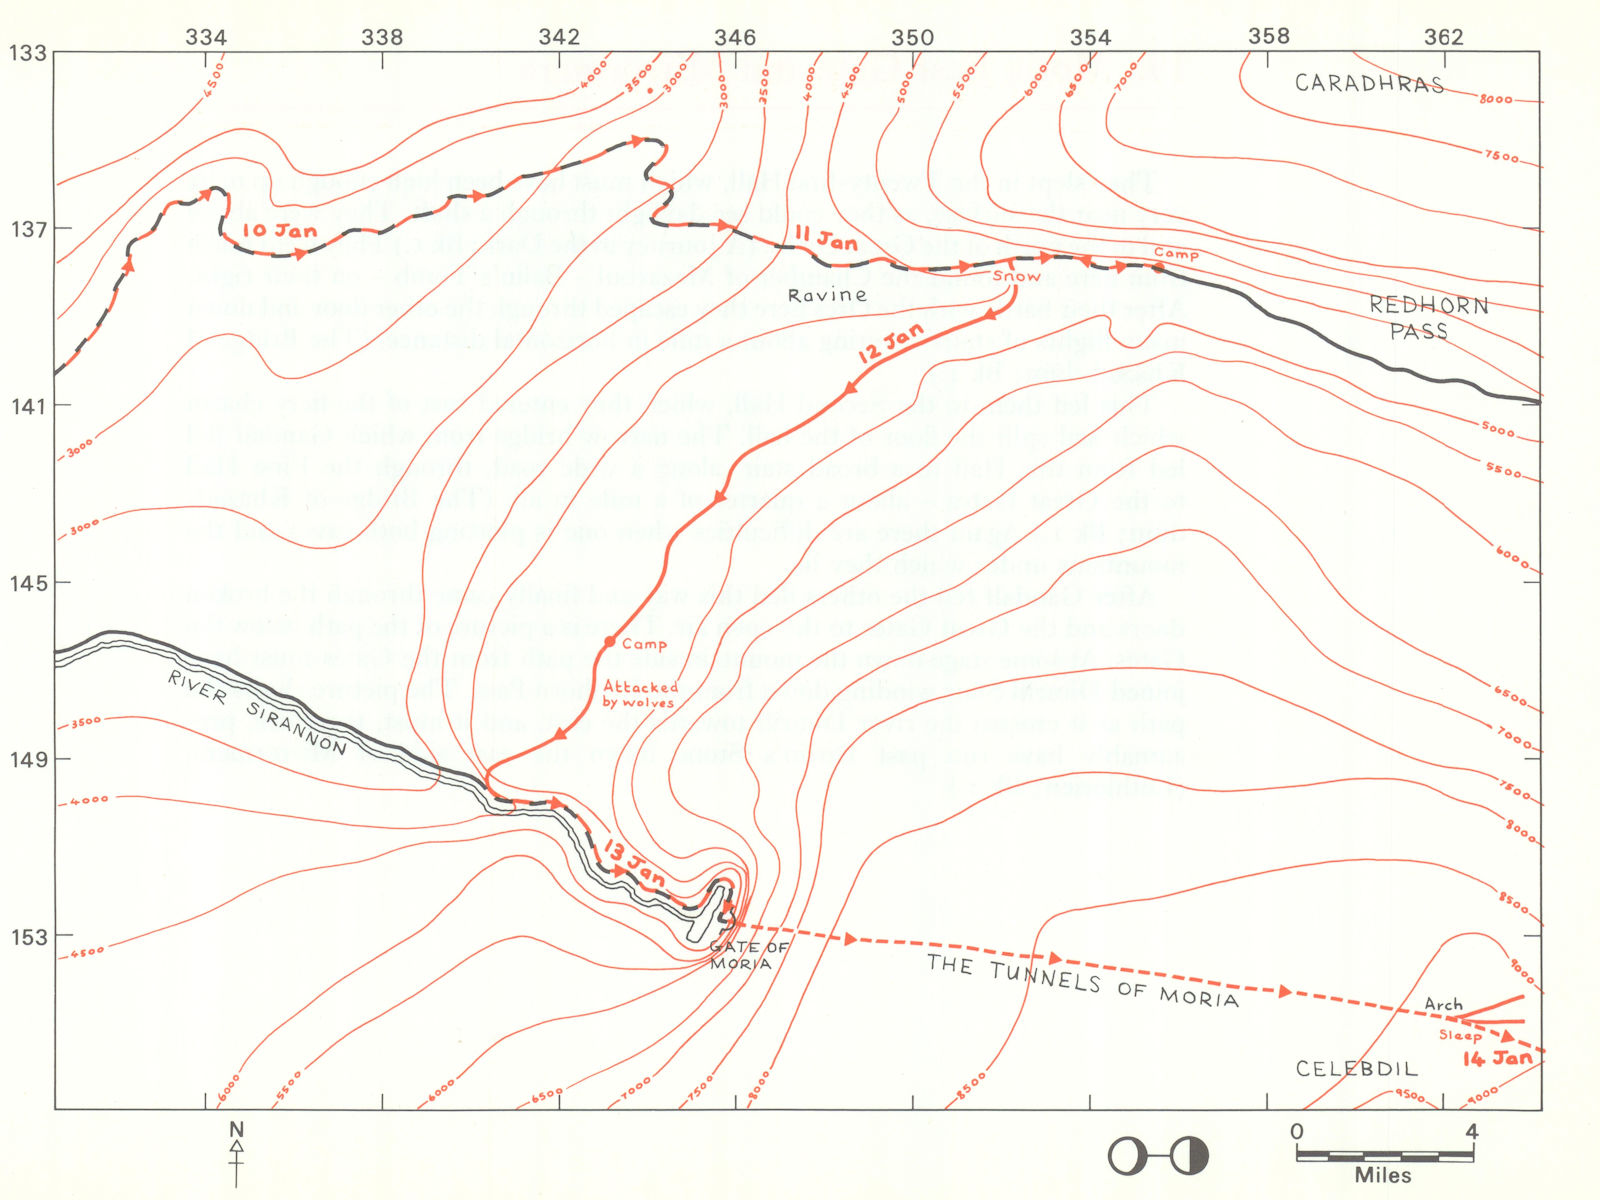 MIDDLE-EARTH Redhorn Gate Pass & Moria. Frodo's route. TOLKIEN/STRACHEY 1981 map